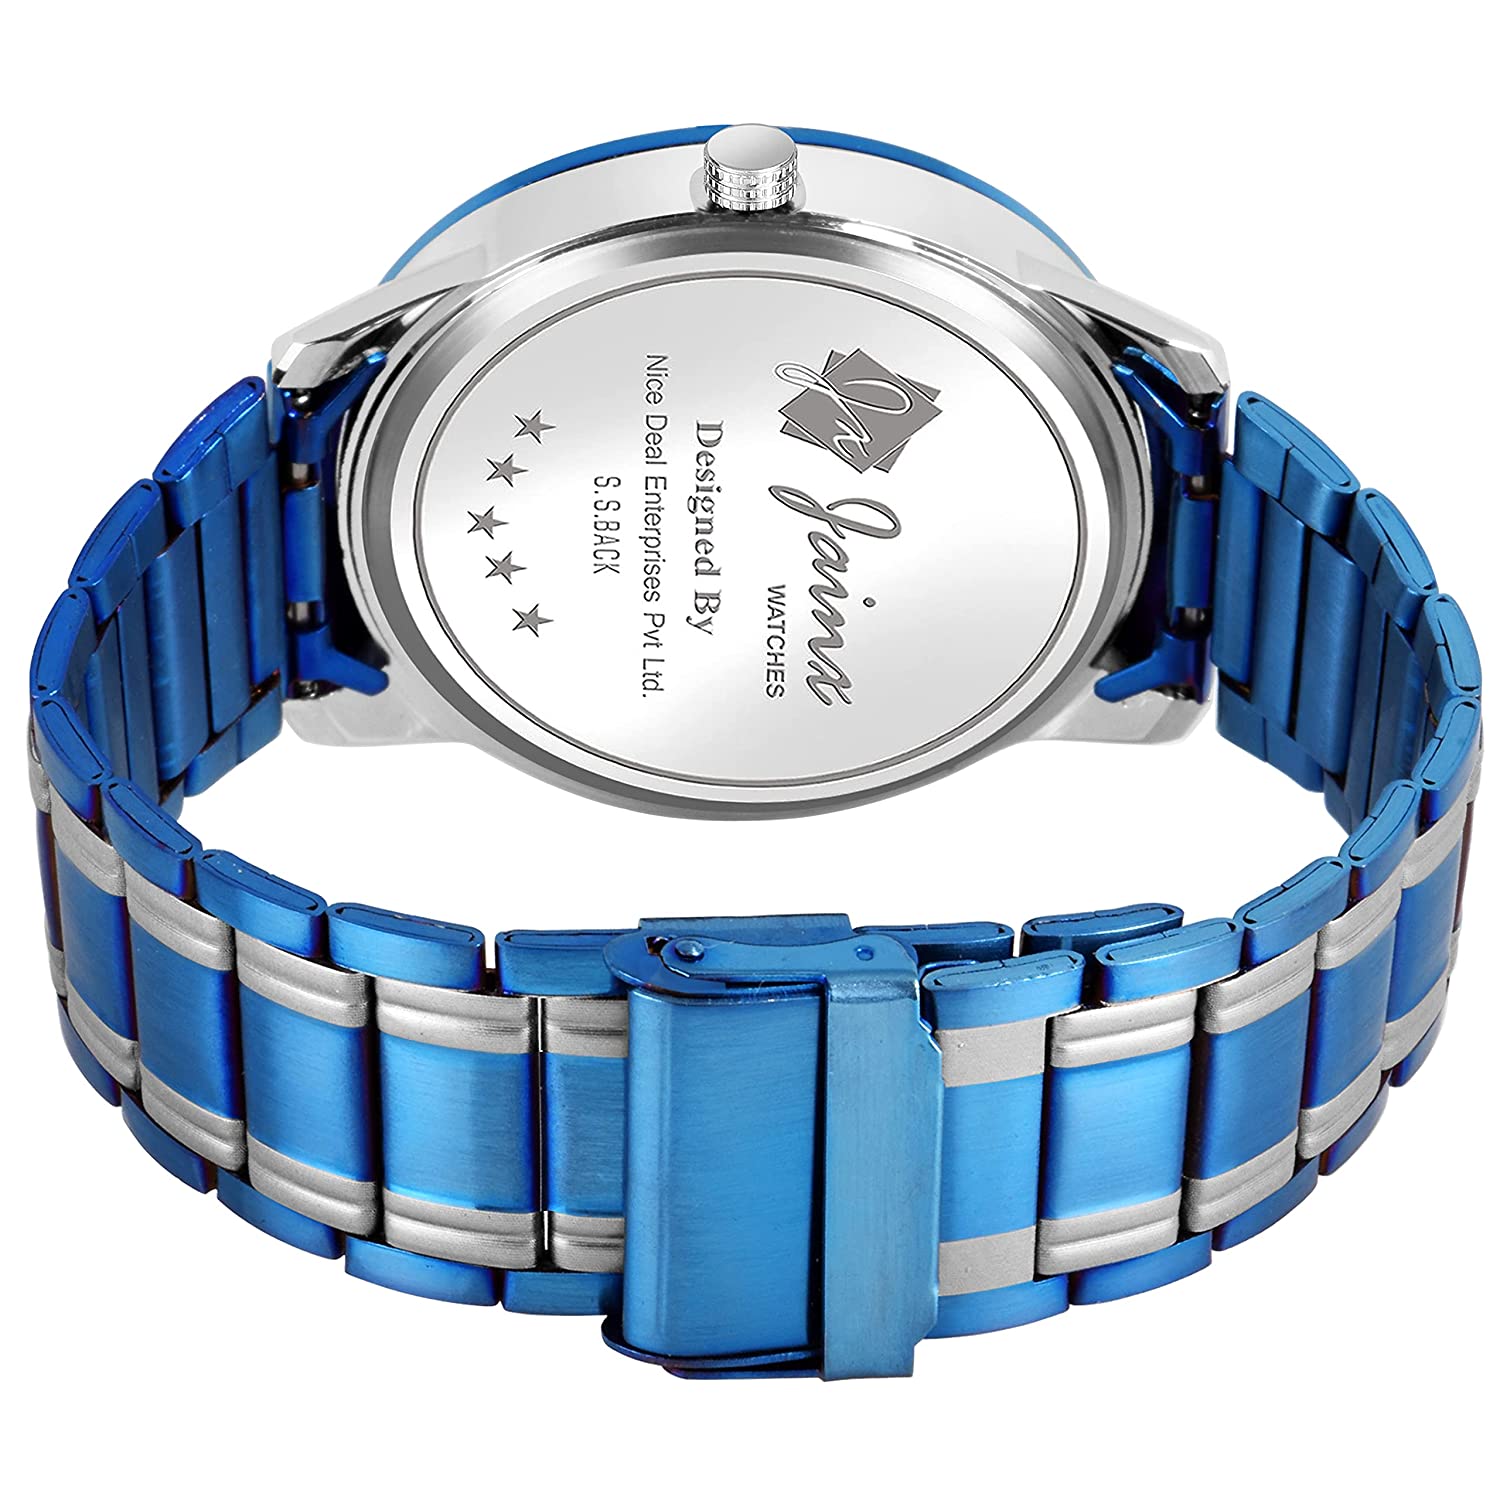 Sports Day & Date Function Blue Chain Analog Watch - For Men JM1171 - Jainx Store